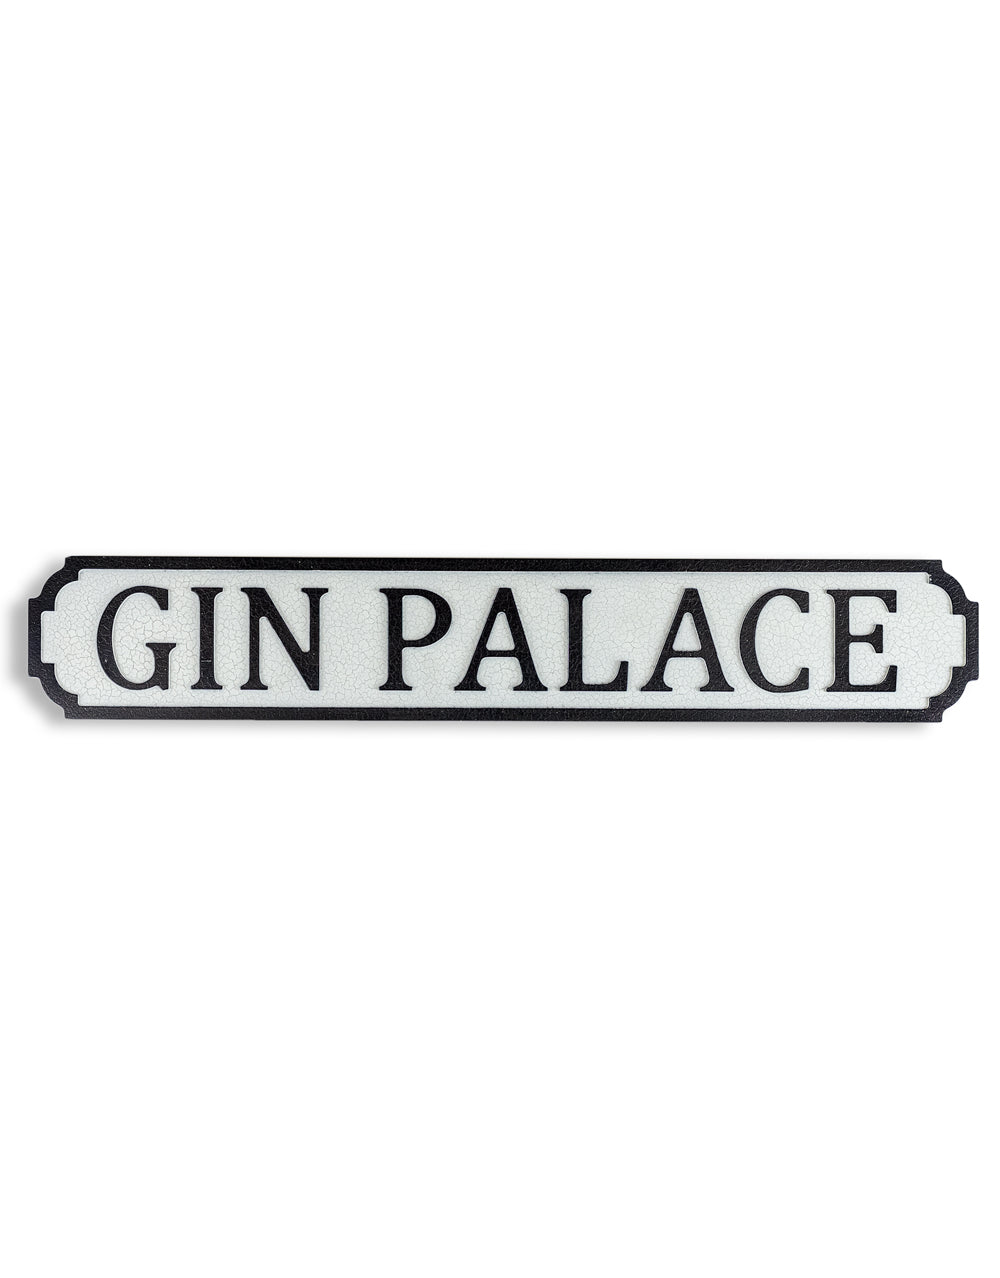 Antiqued Wooden "Gin Palace" Road Sign